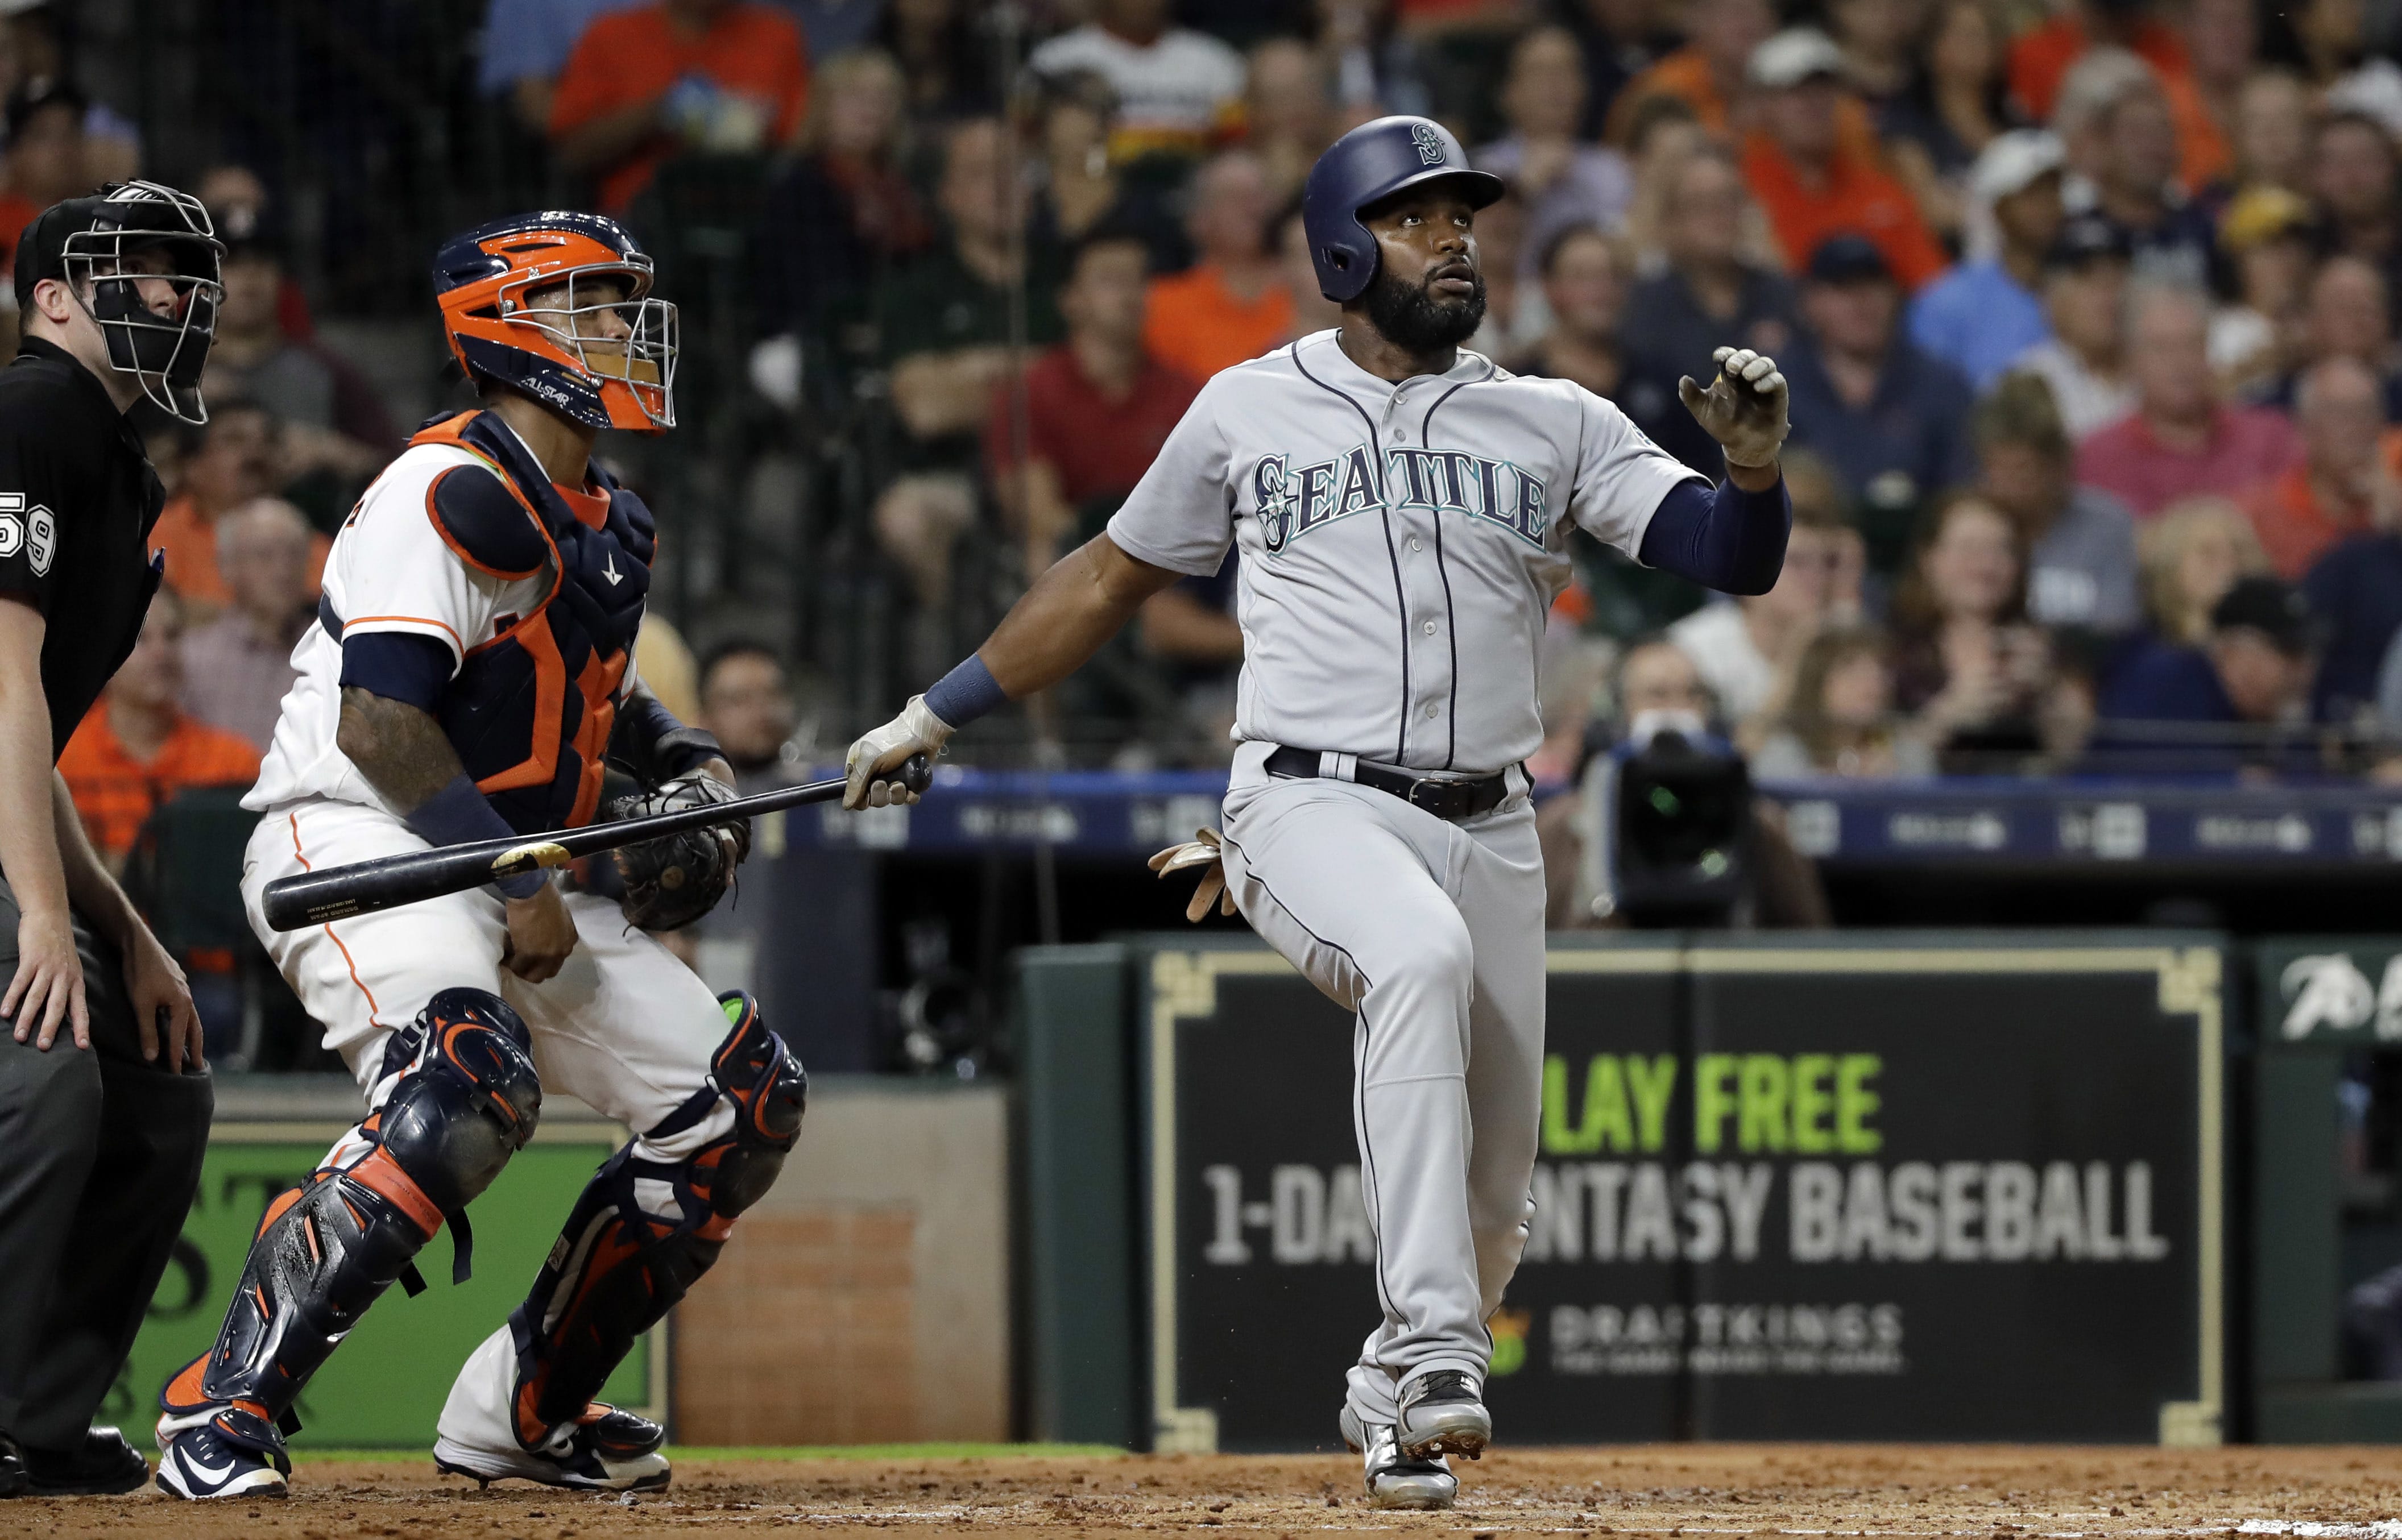 Seattle Mariners' Denard Span watches his two-run home run in front of Houston Astros catcher Martin Maldonado during the second inning of a baseball game Thursday, Aug. 9, 2018, in Houston. (AP Photo/David J.